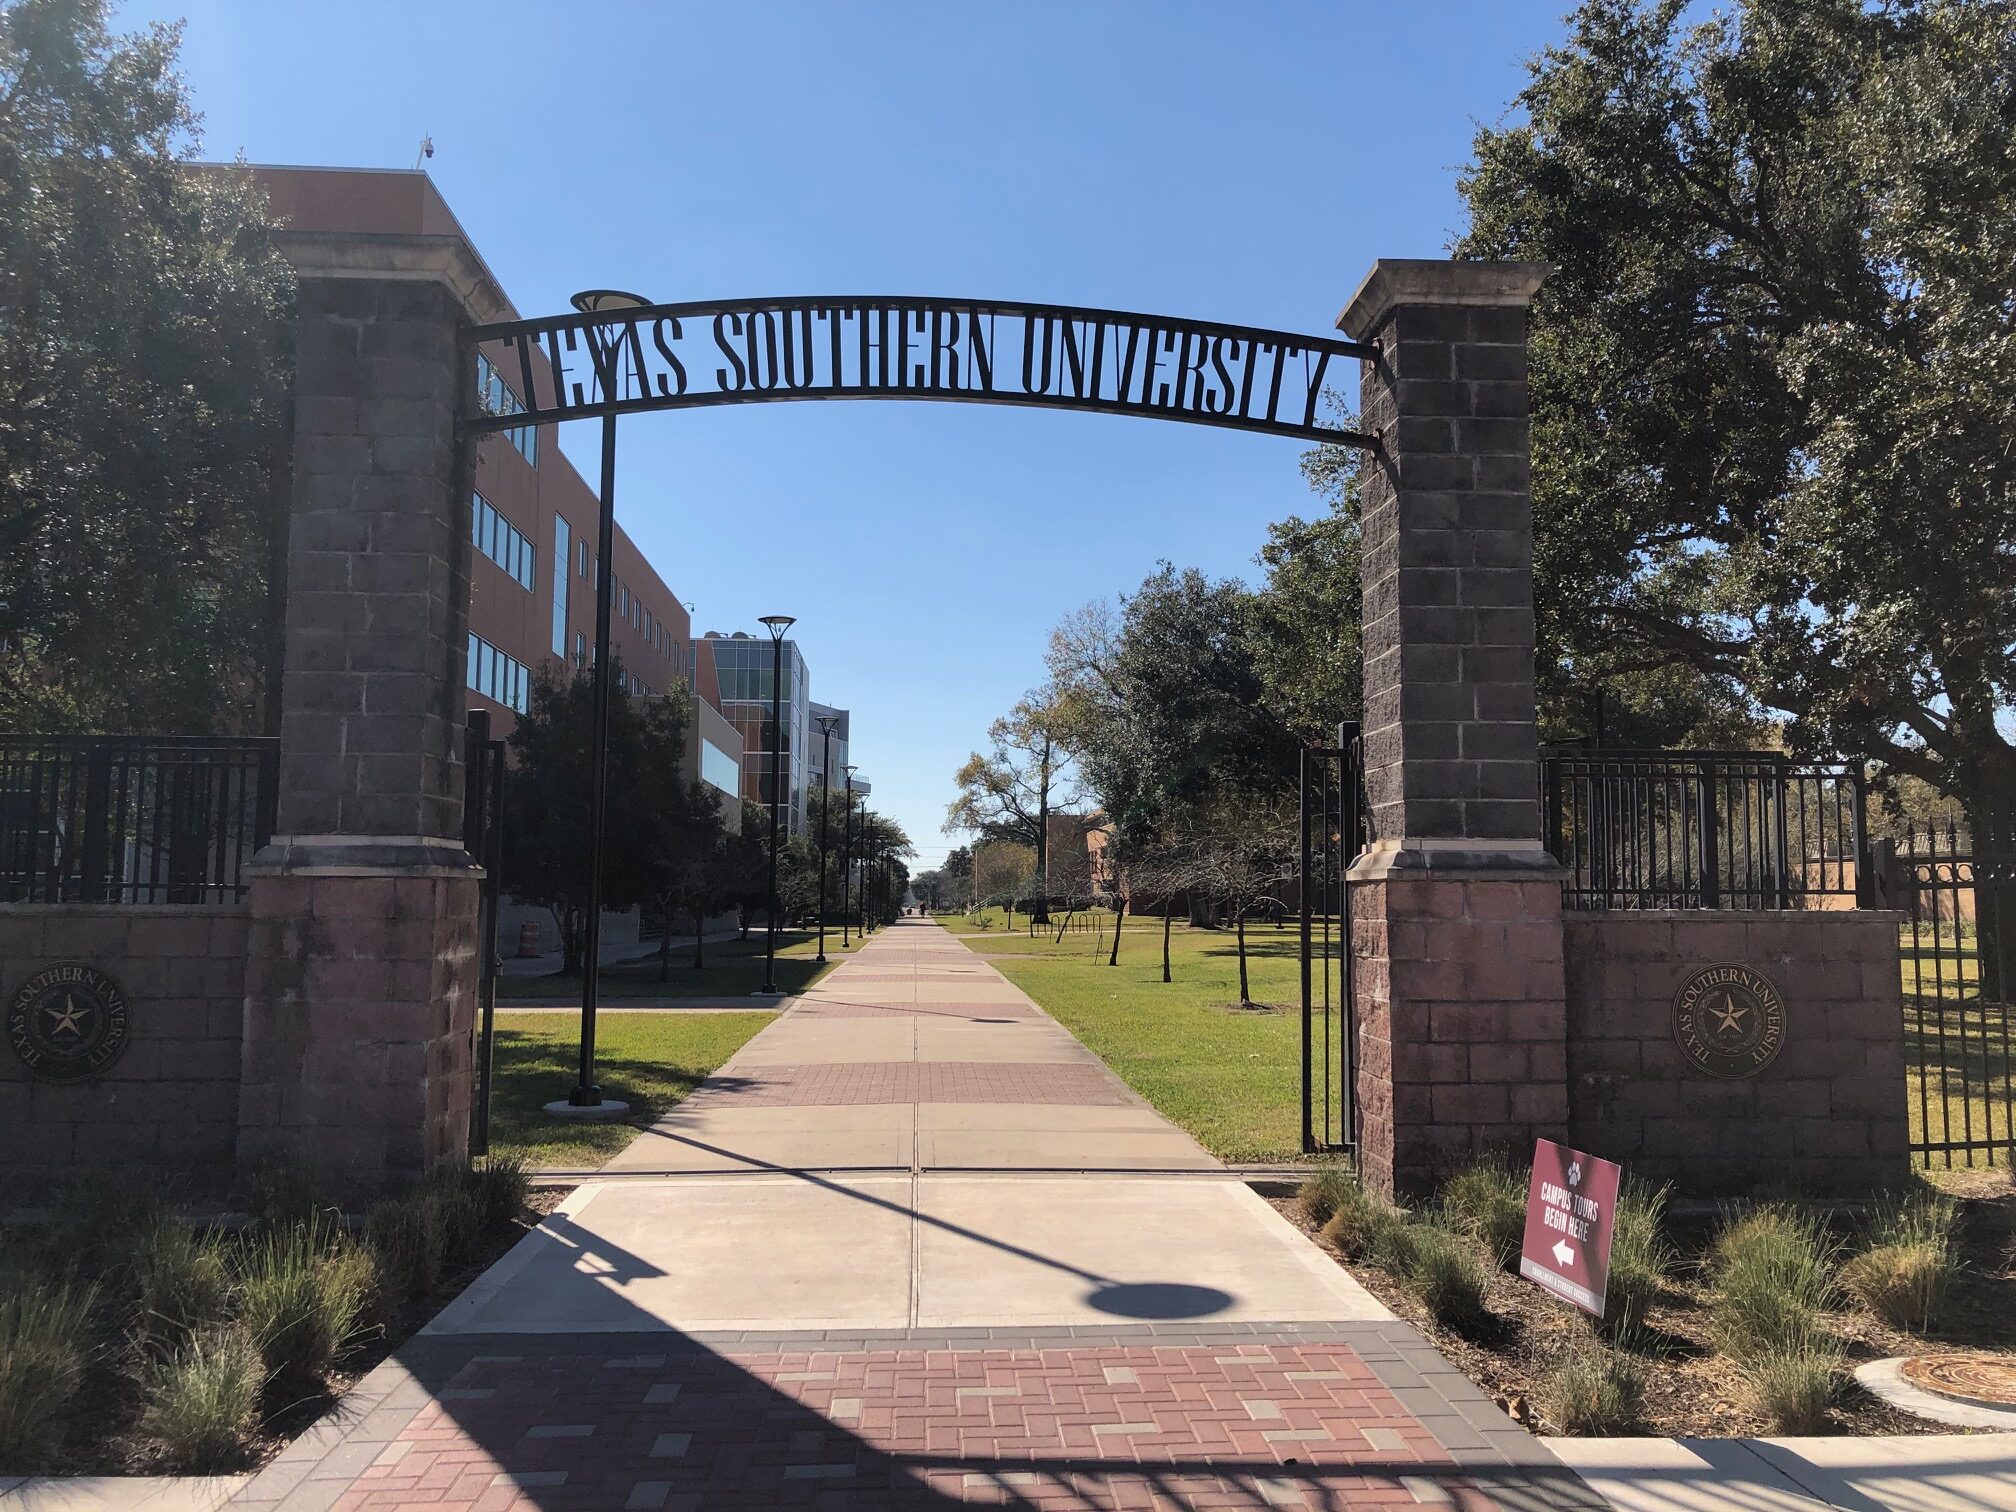 East Entrance to Texas Southern University